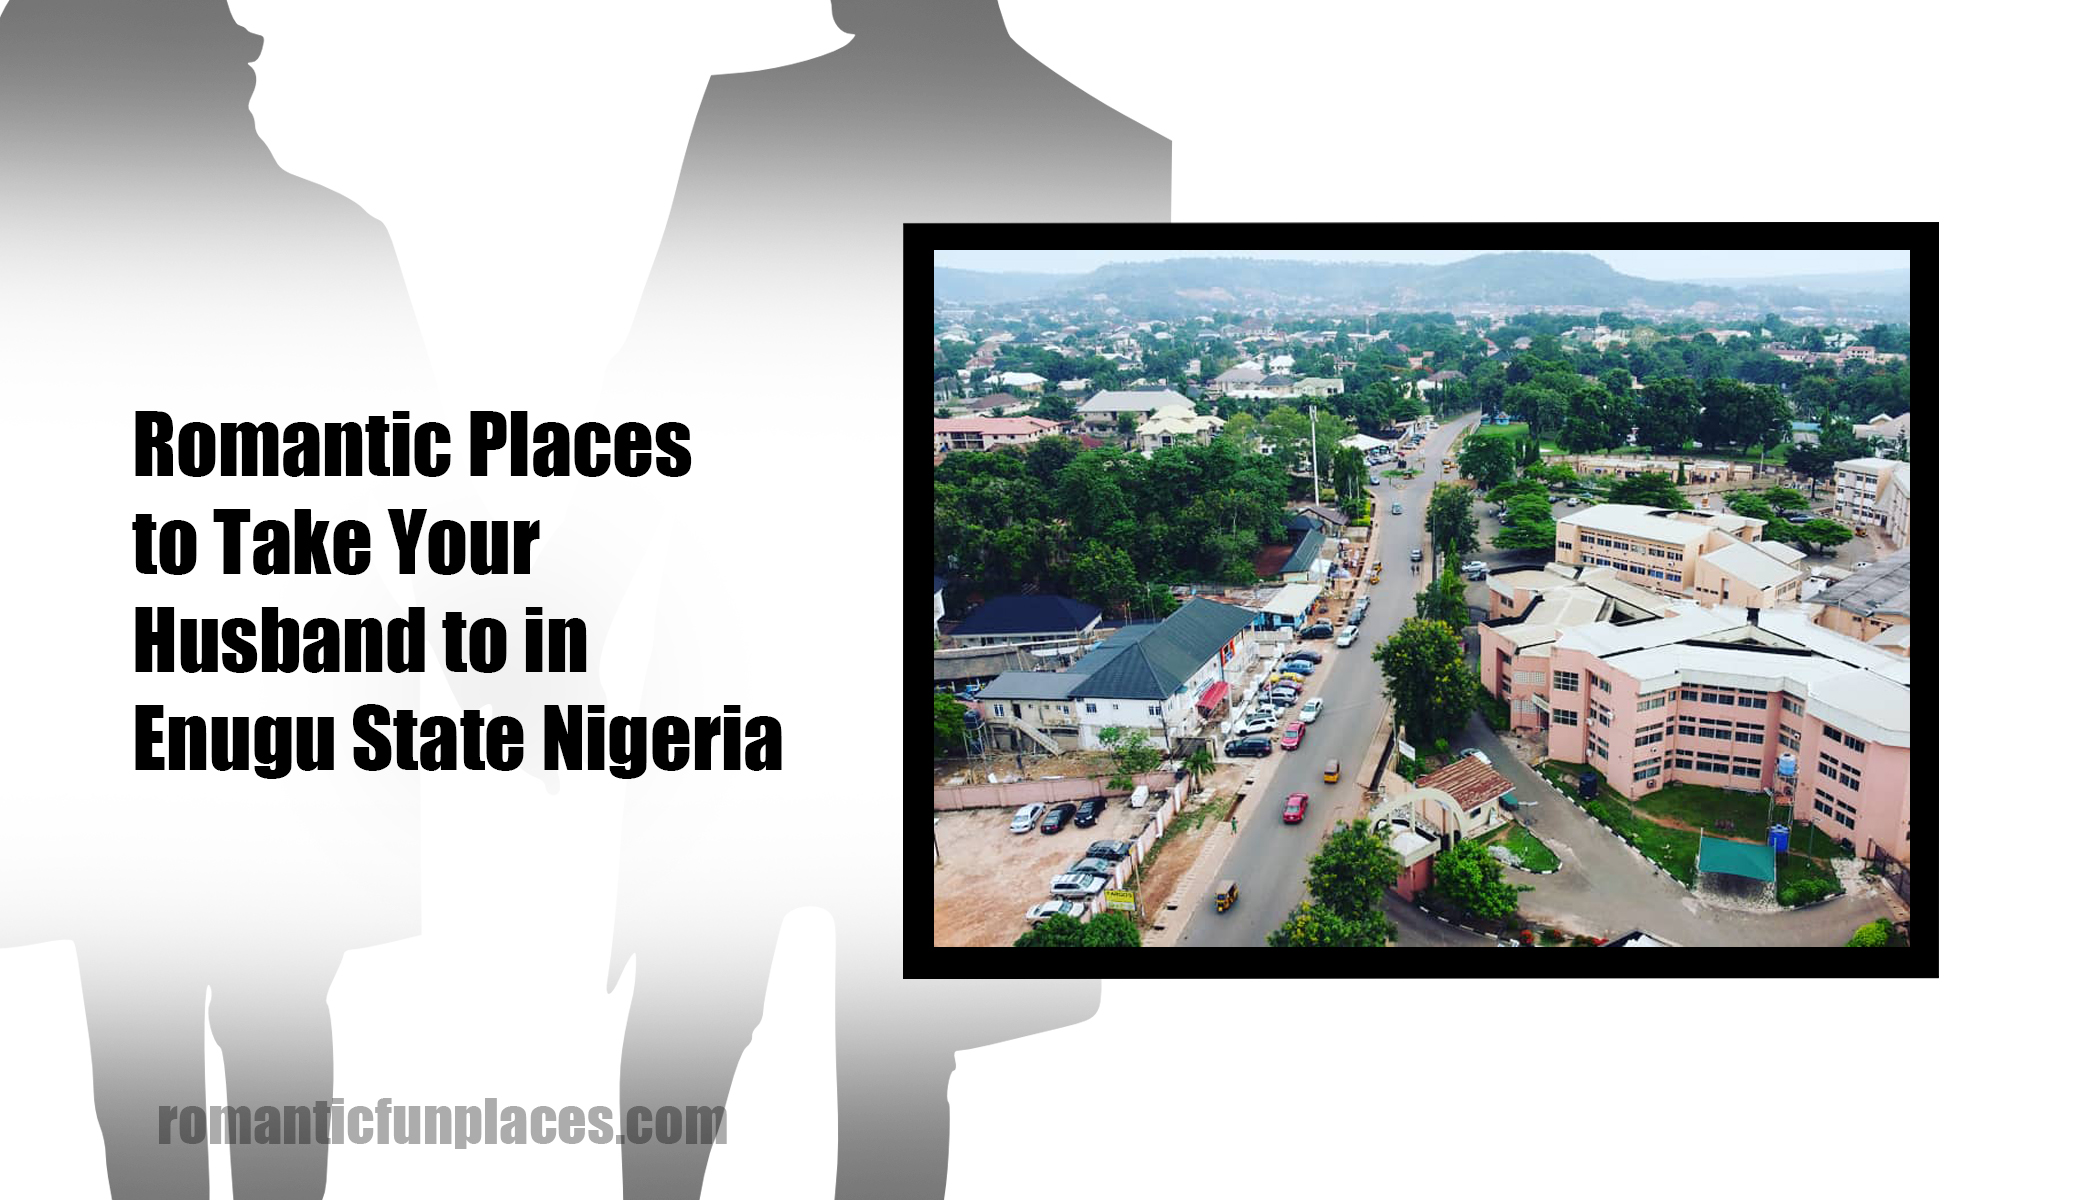 Romantic Places to Take Your Husband to in Enugu State Nigeria